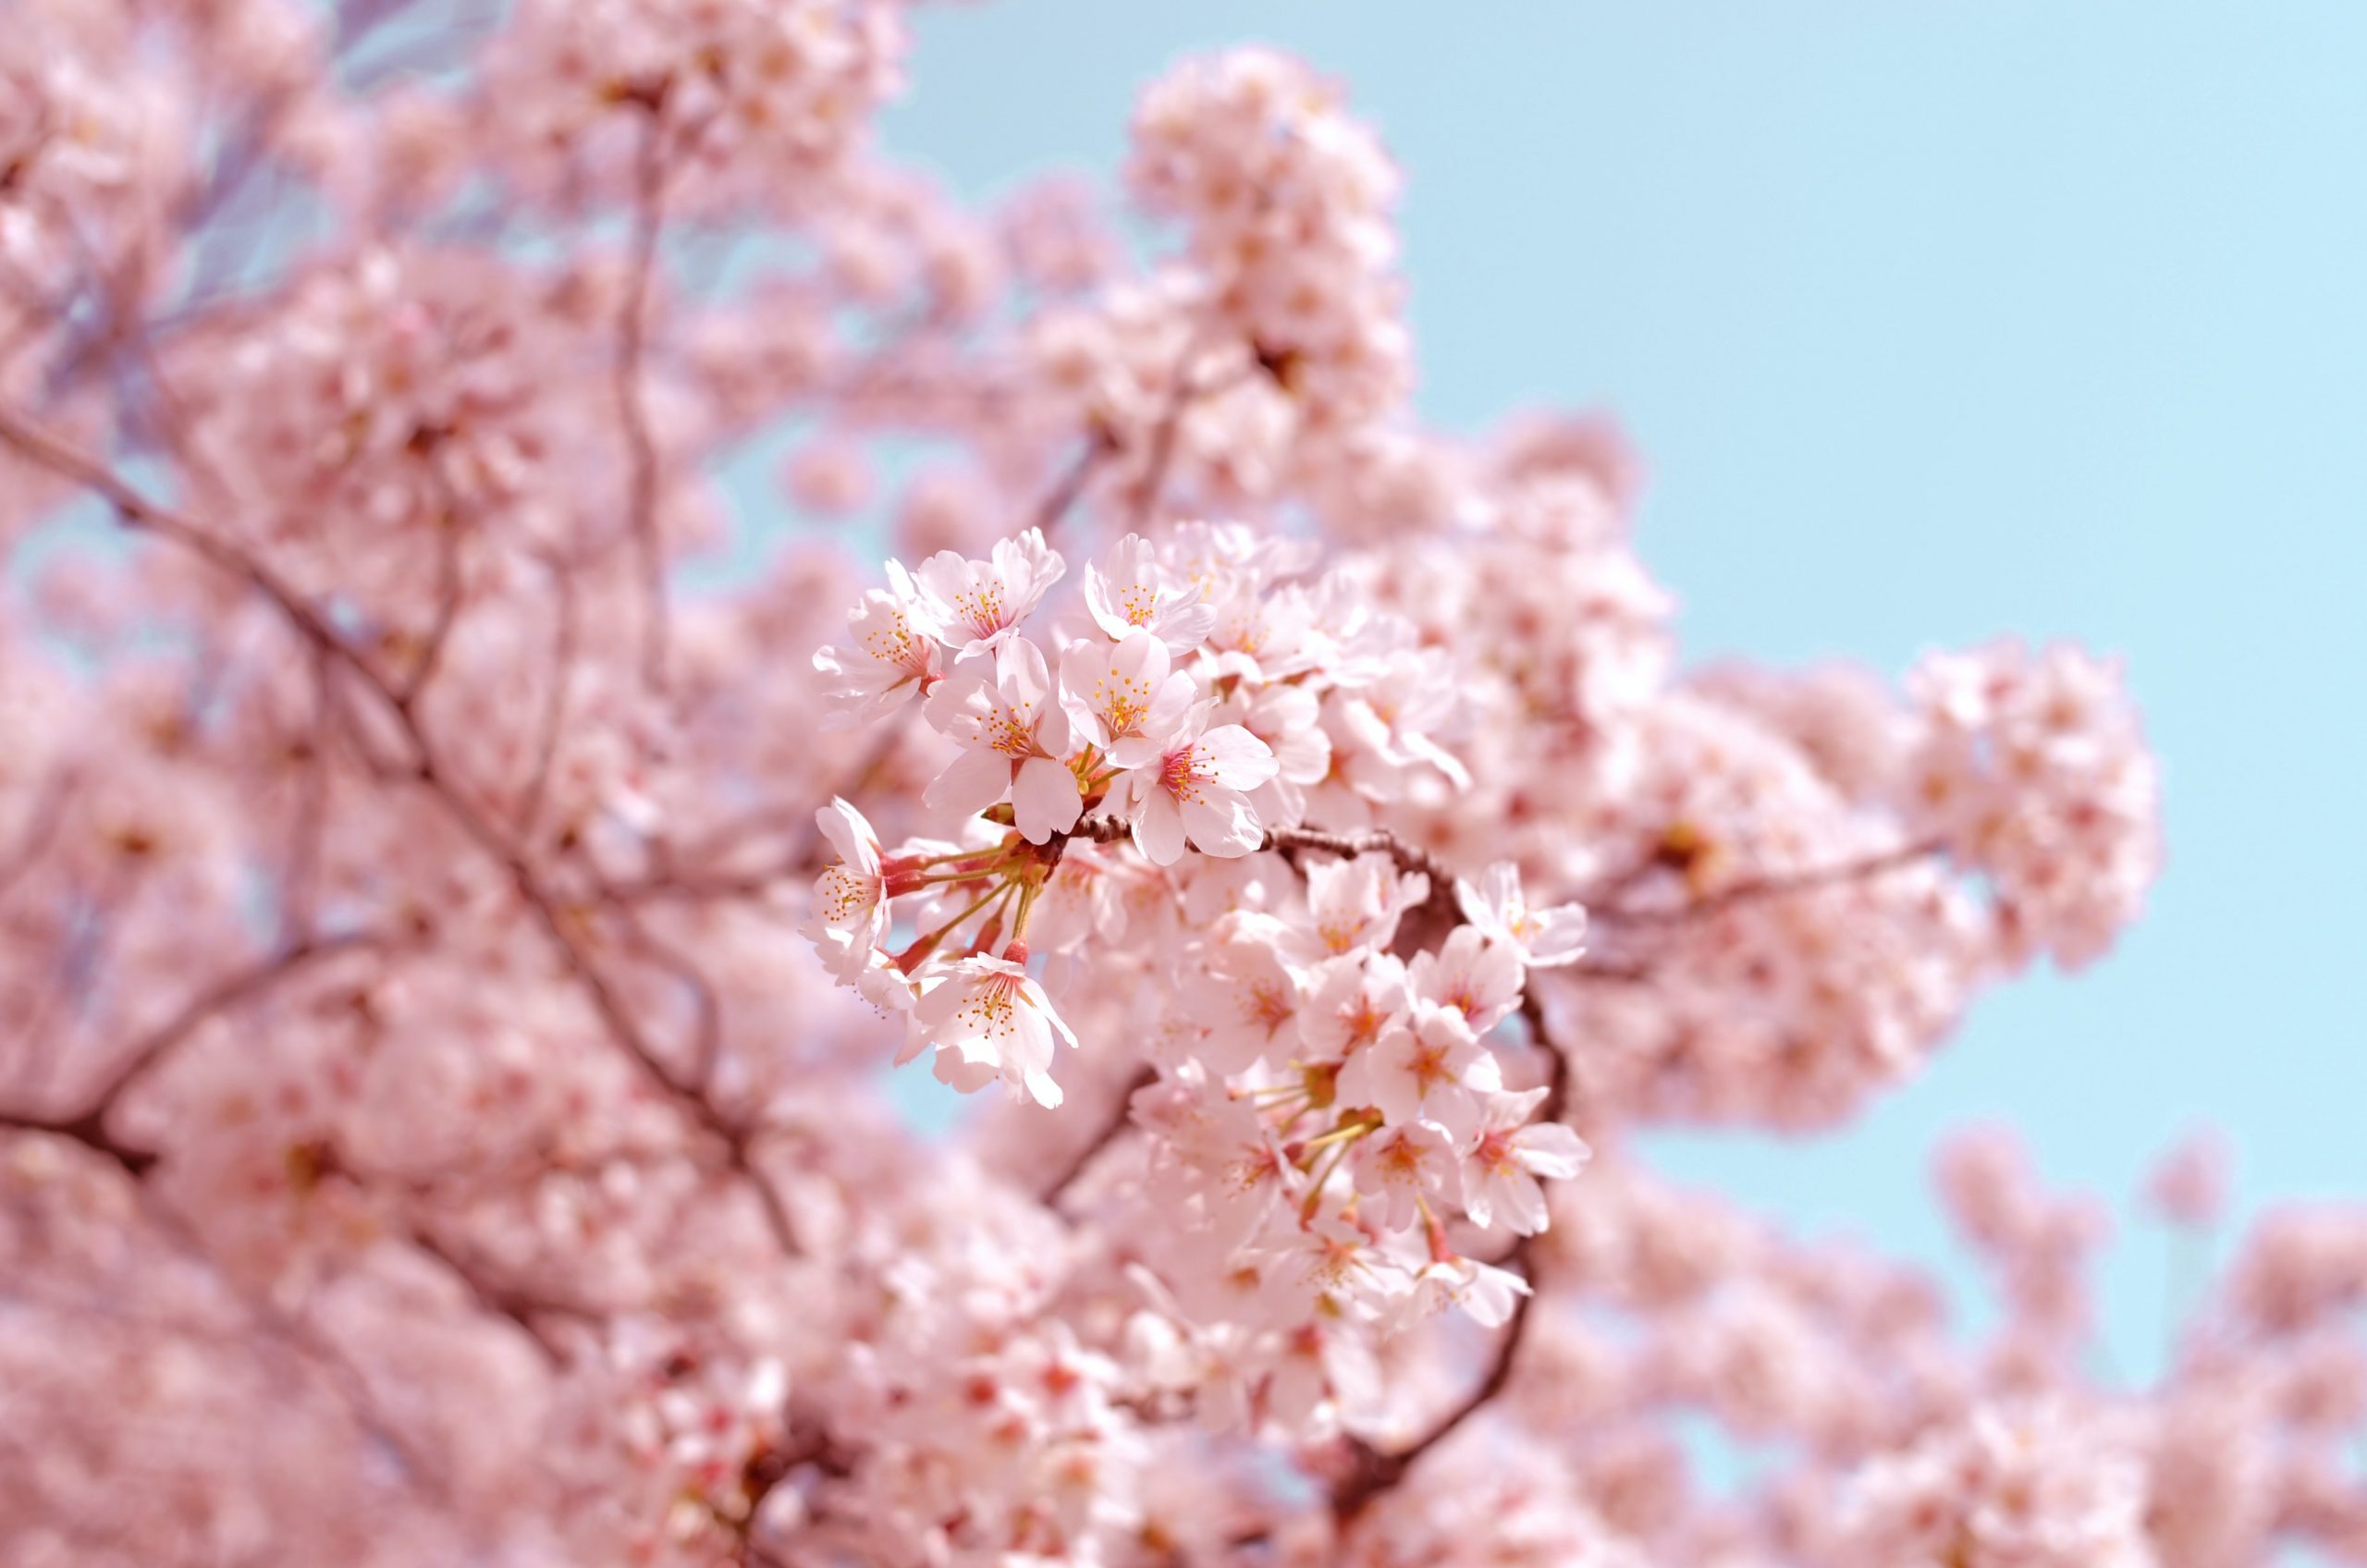 What Is The Difference Between A Cherry Blossom And A Cherry Tree?